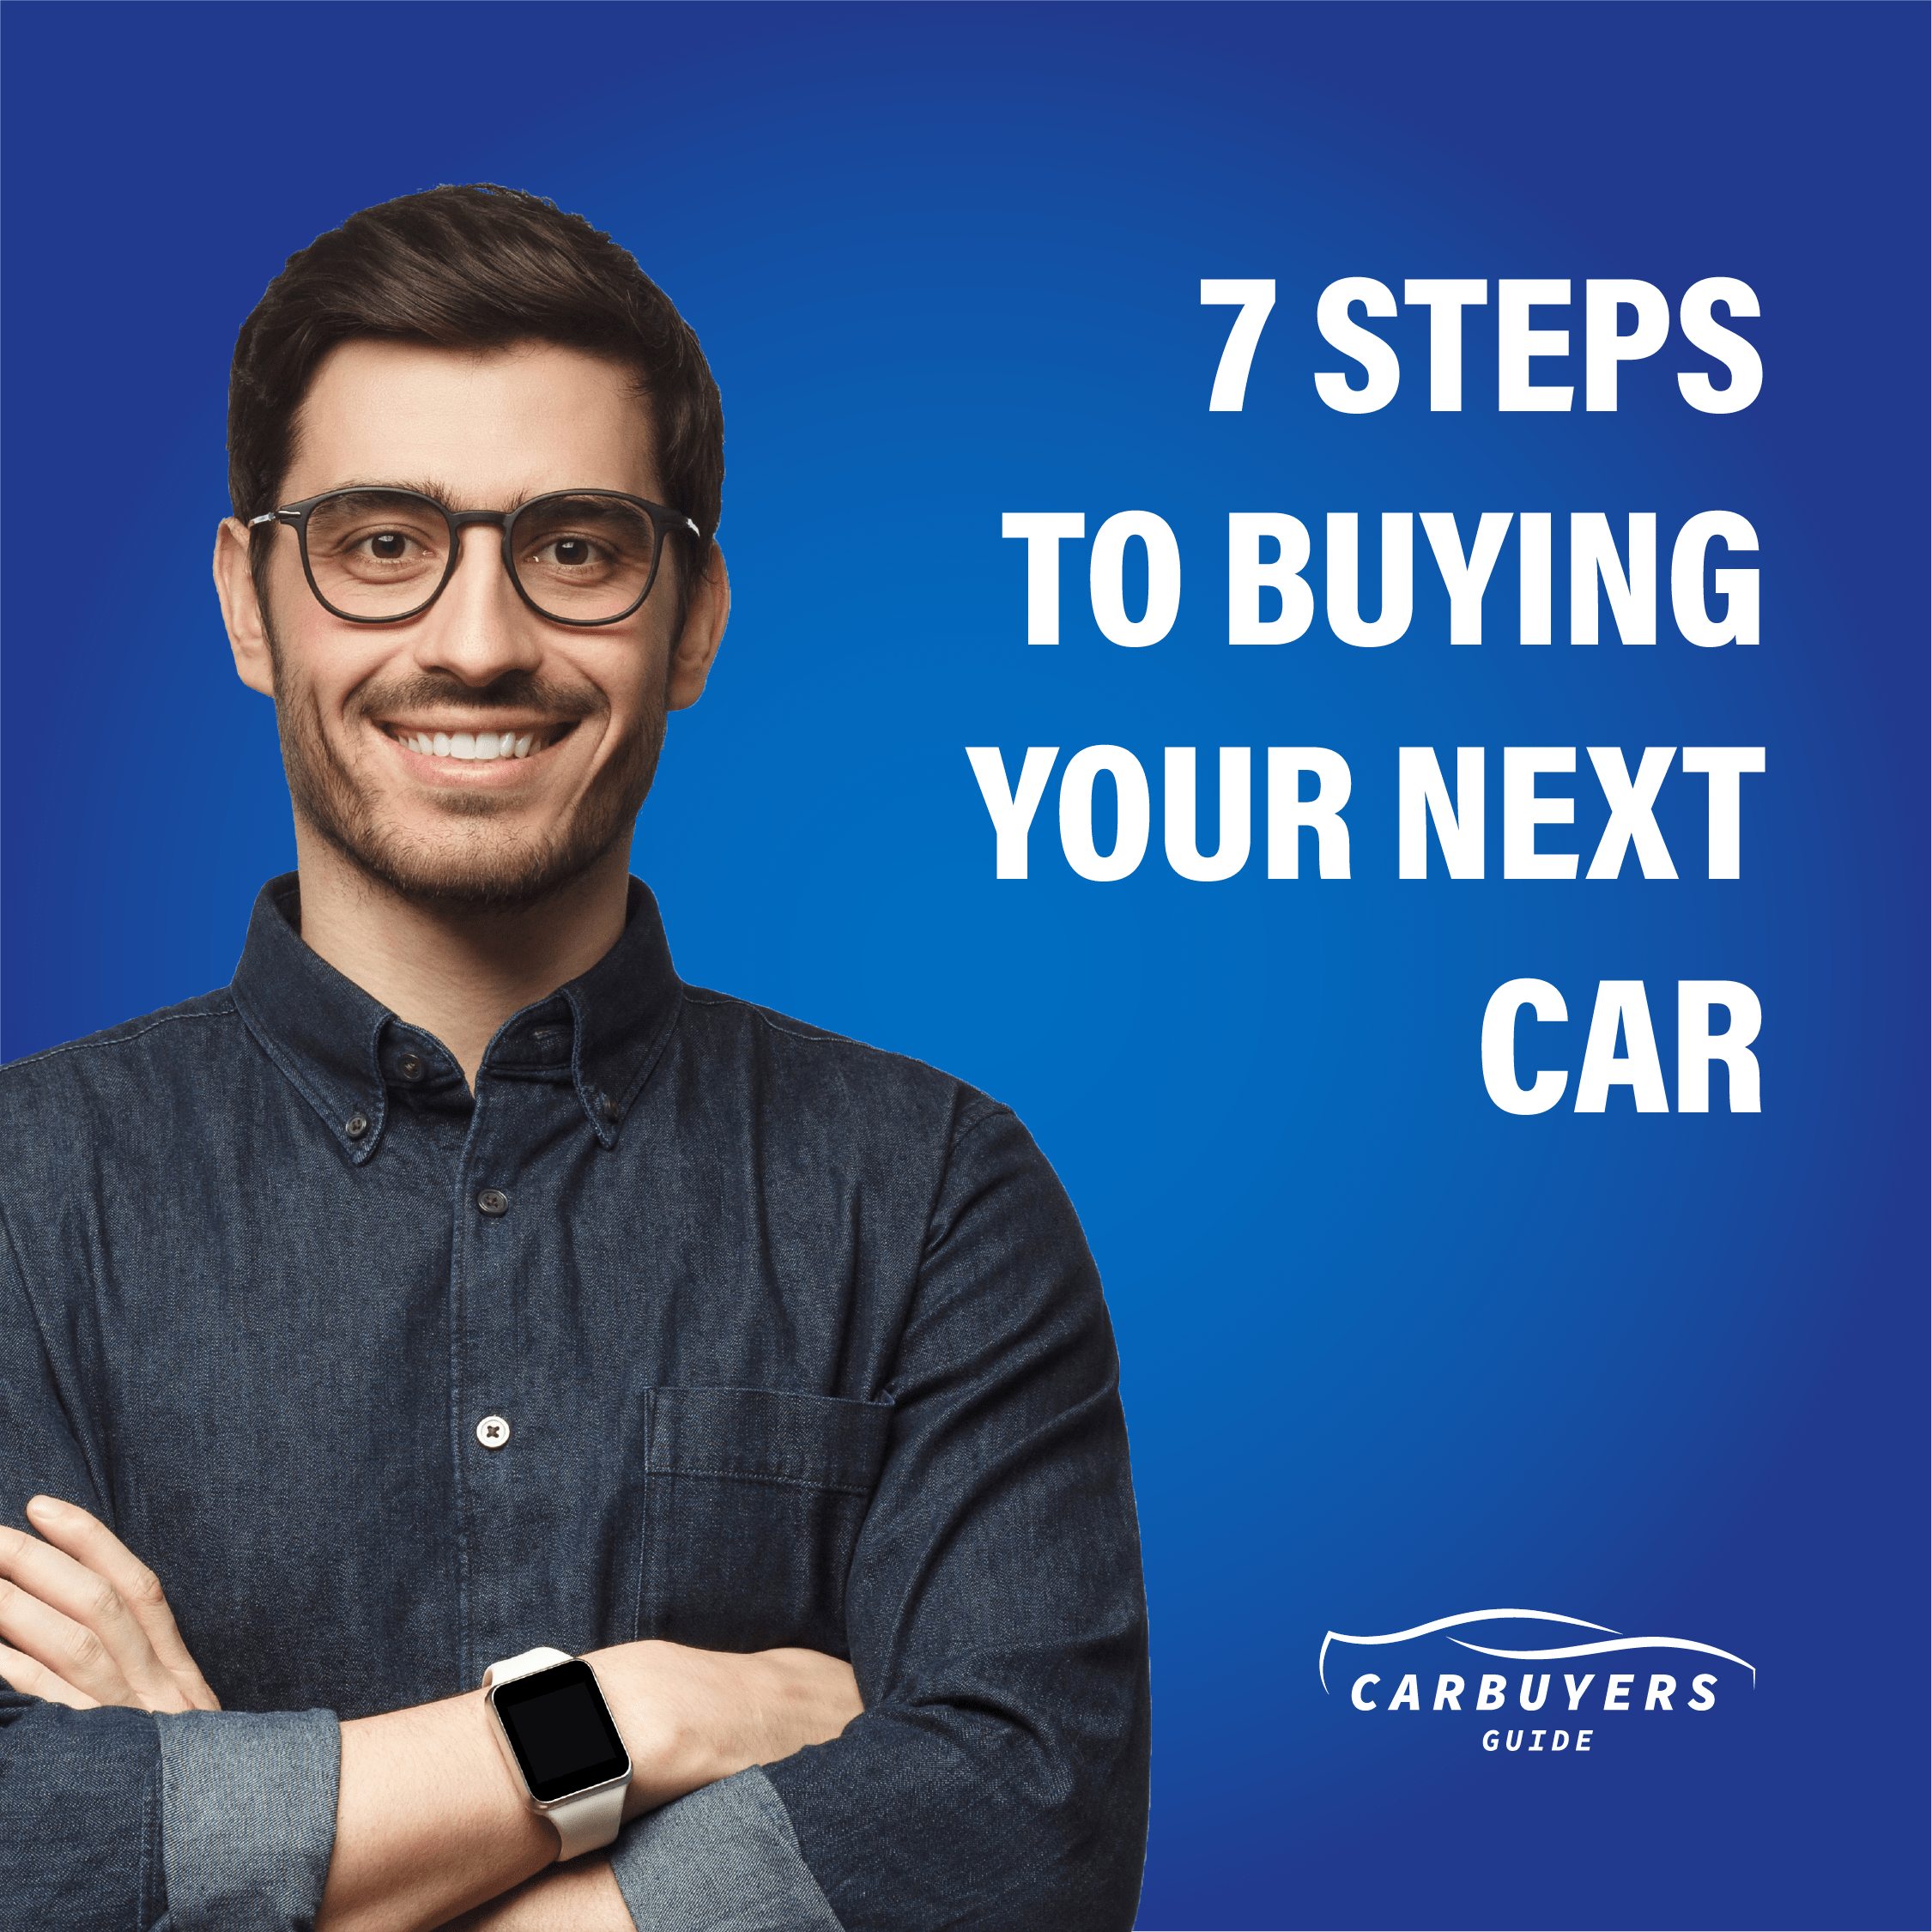 Car Buyers Guide: 7 Steps to Buying Your Next Car